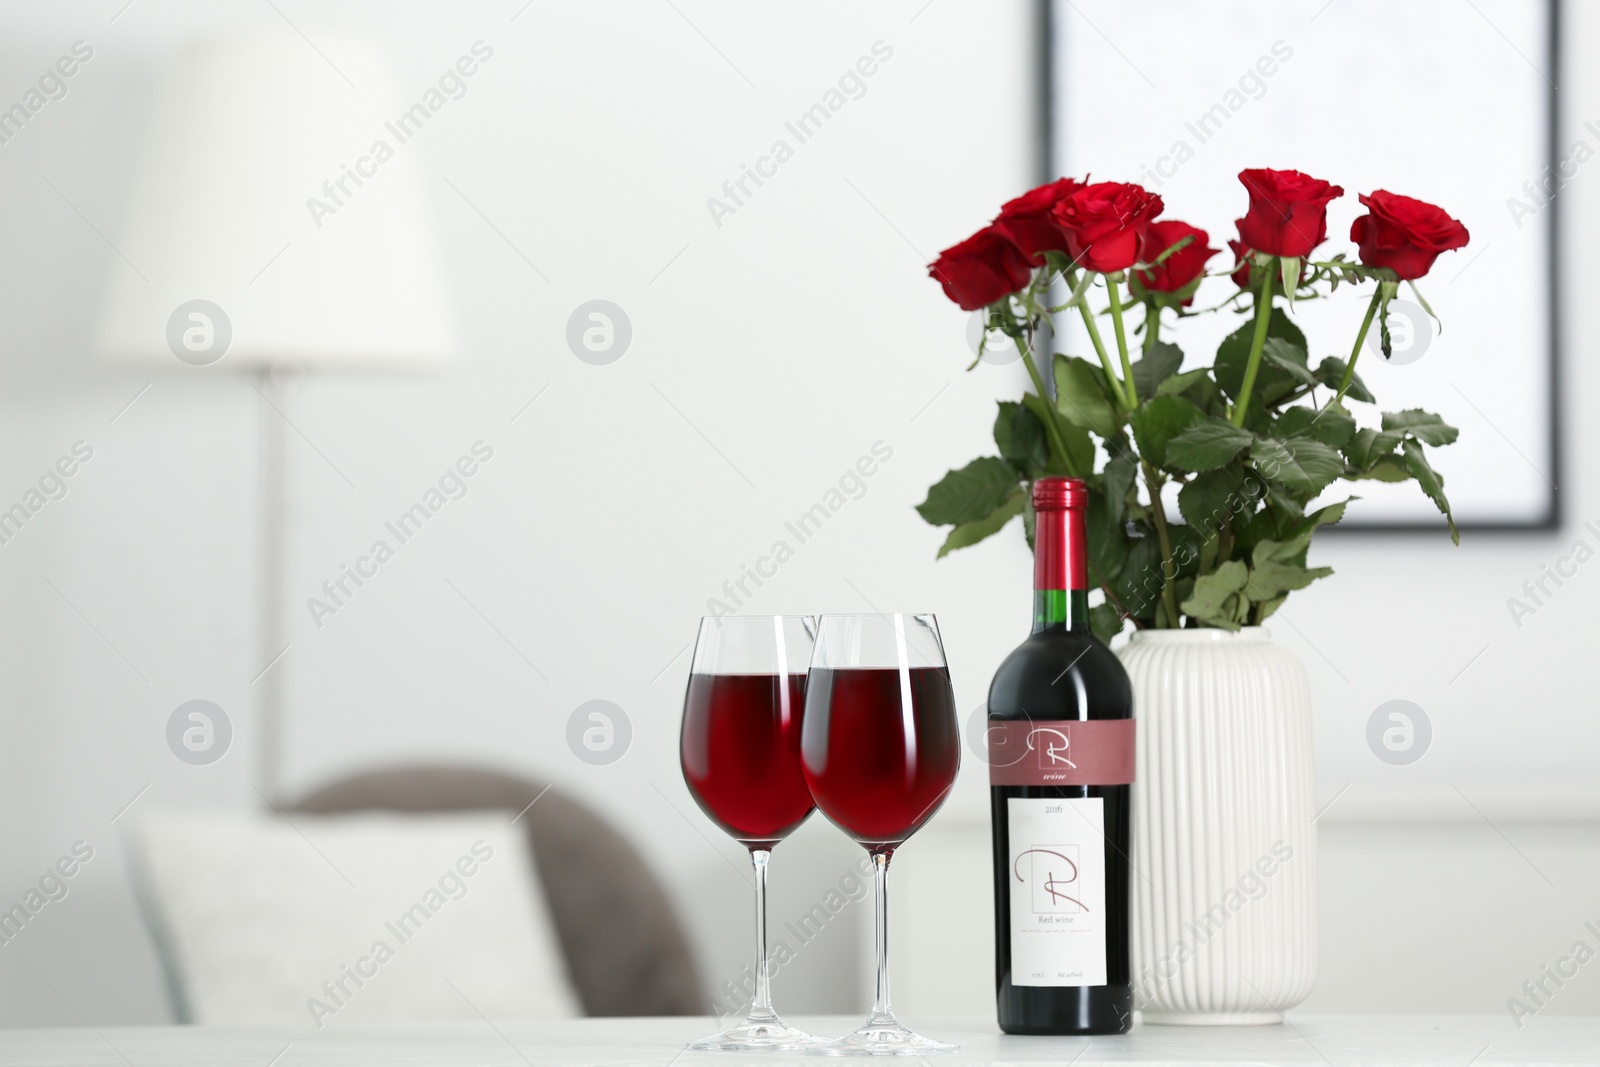 Photo of Bottle, glasses of red wine and vase with roses on table in room, space for text. Romantic date